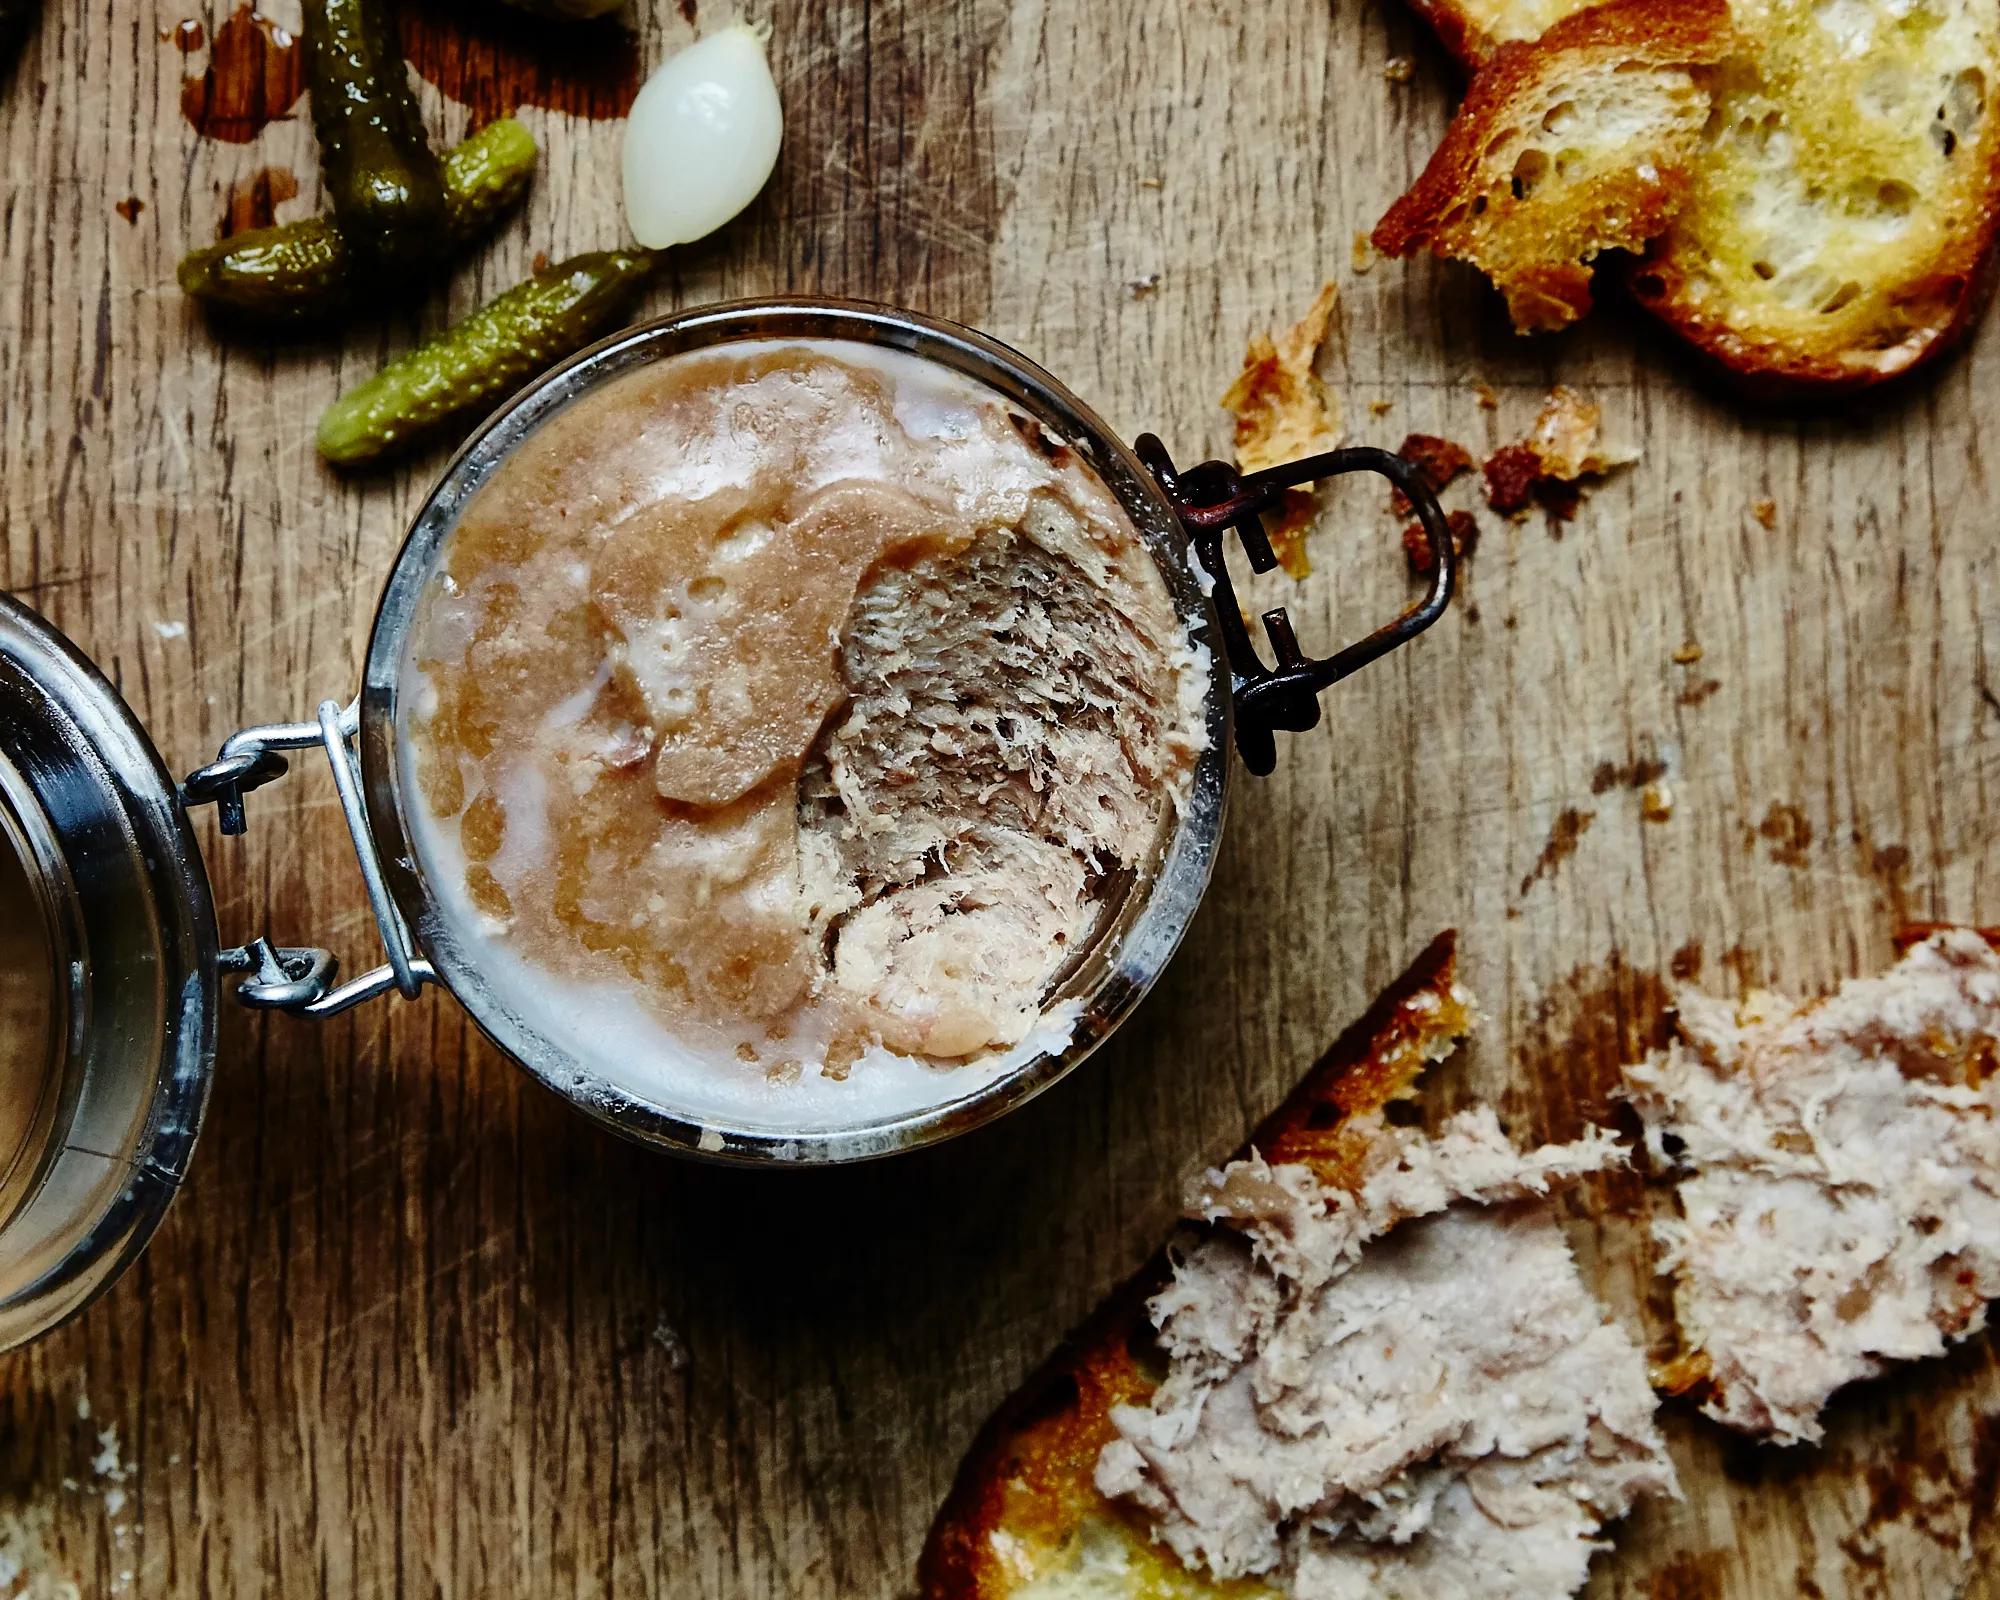 smoked pork rillettes - What is the meaning of rillettes